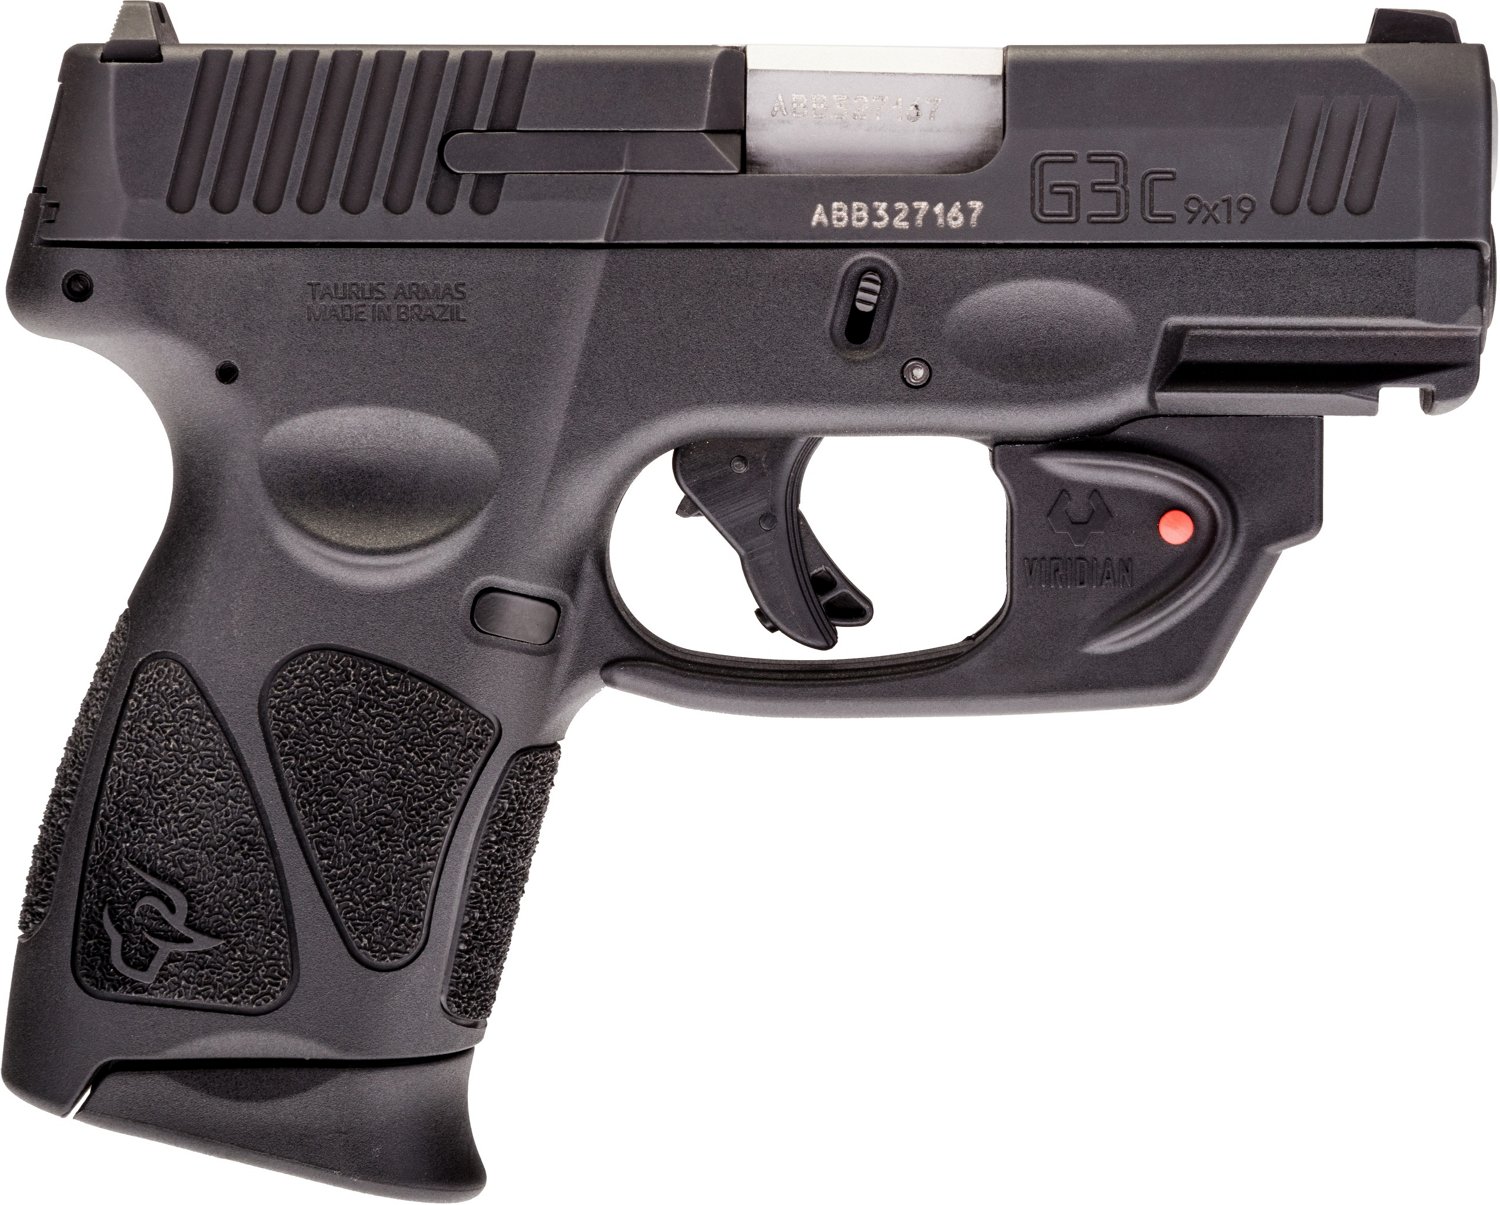 academy sports father's day gun special